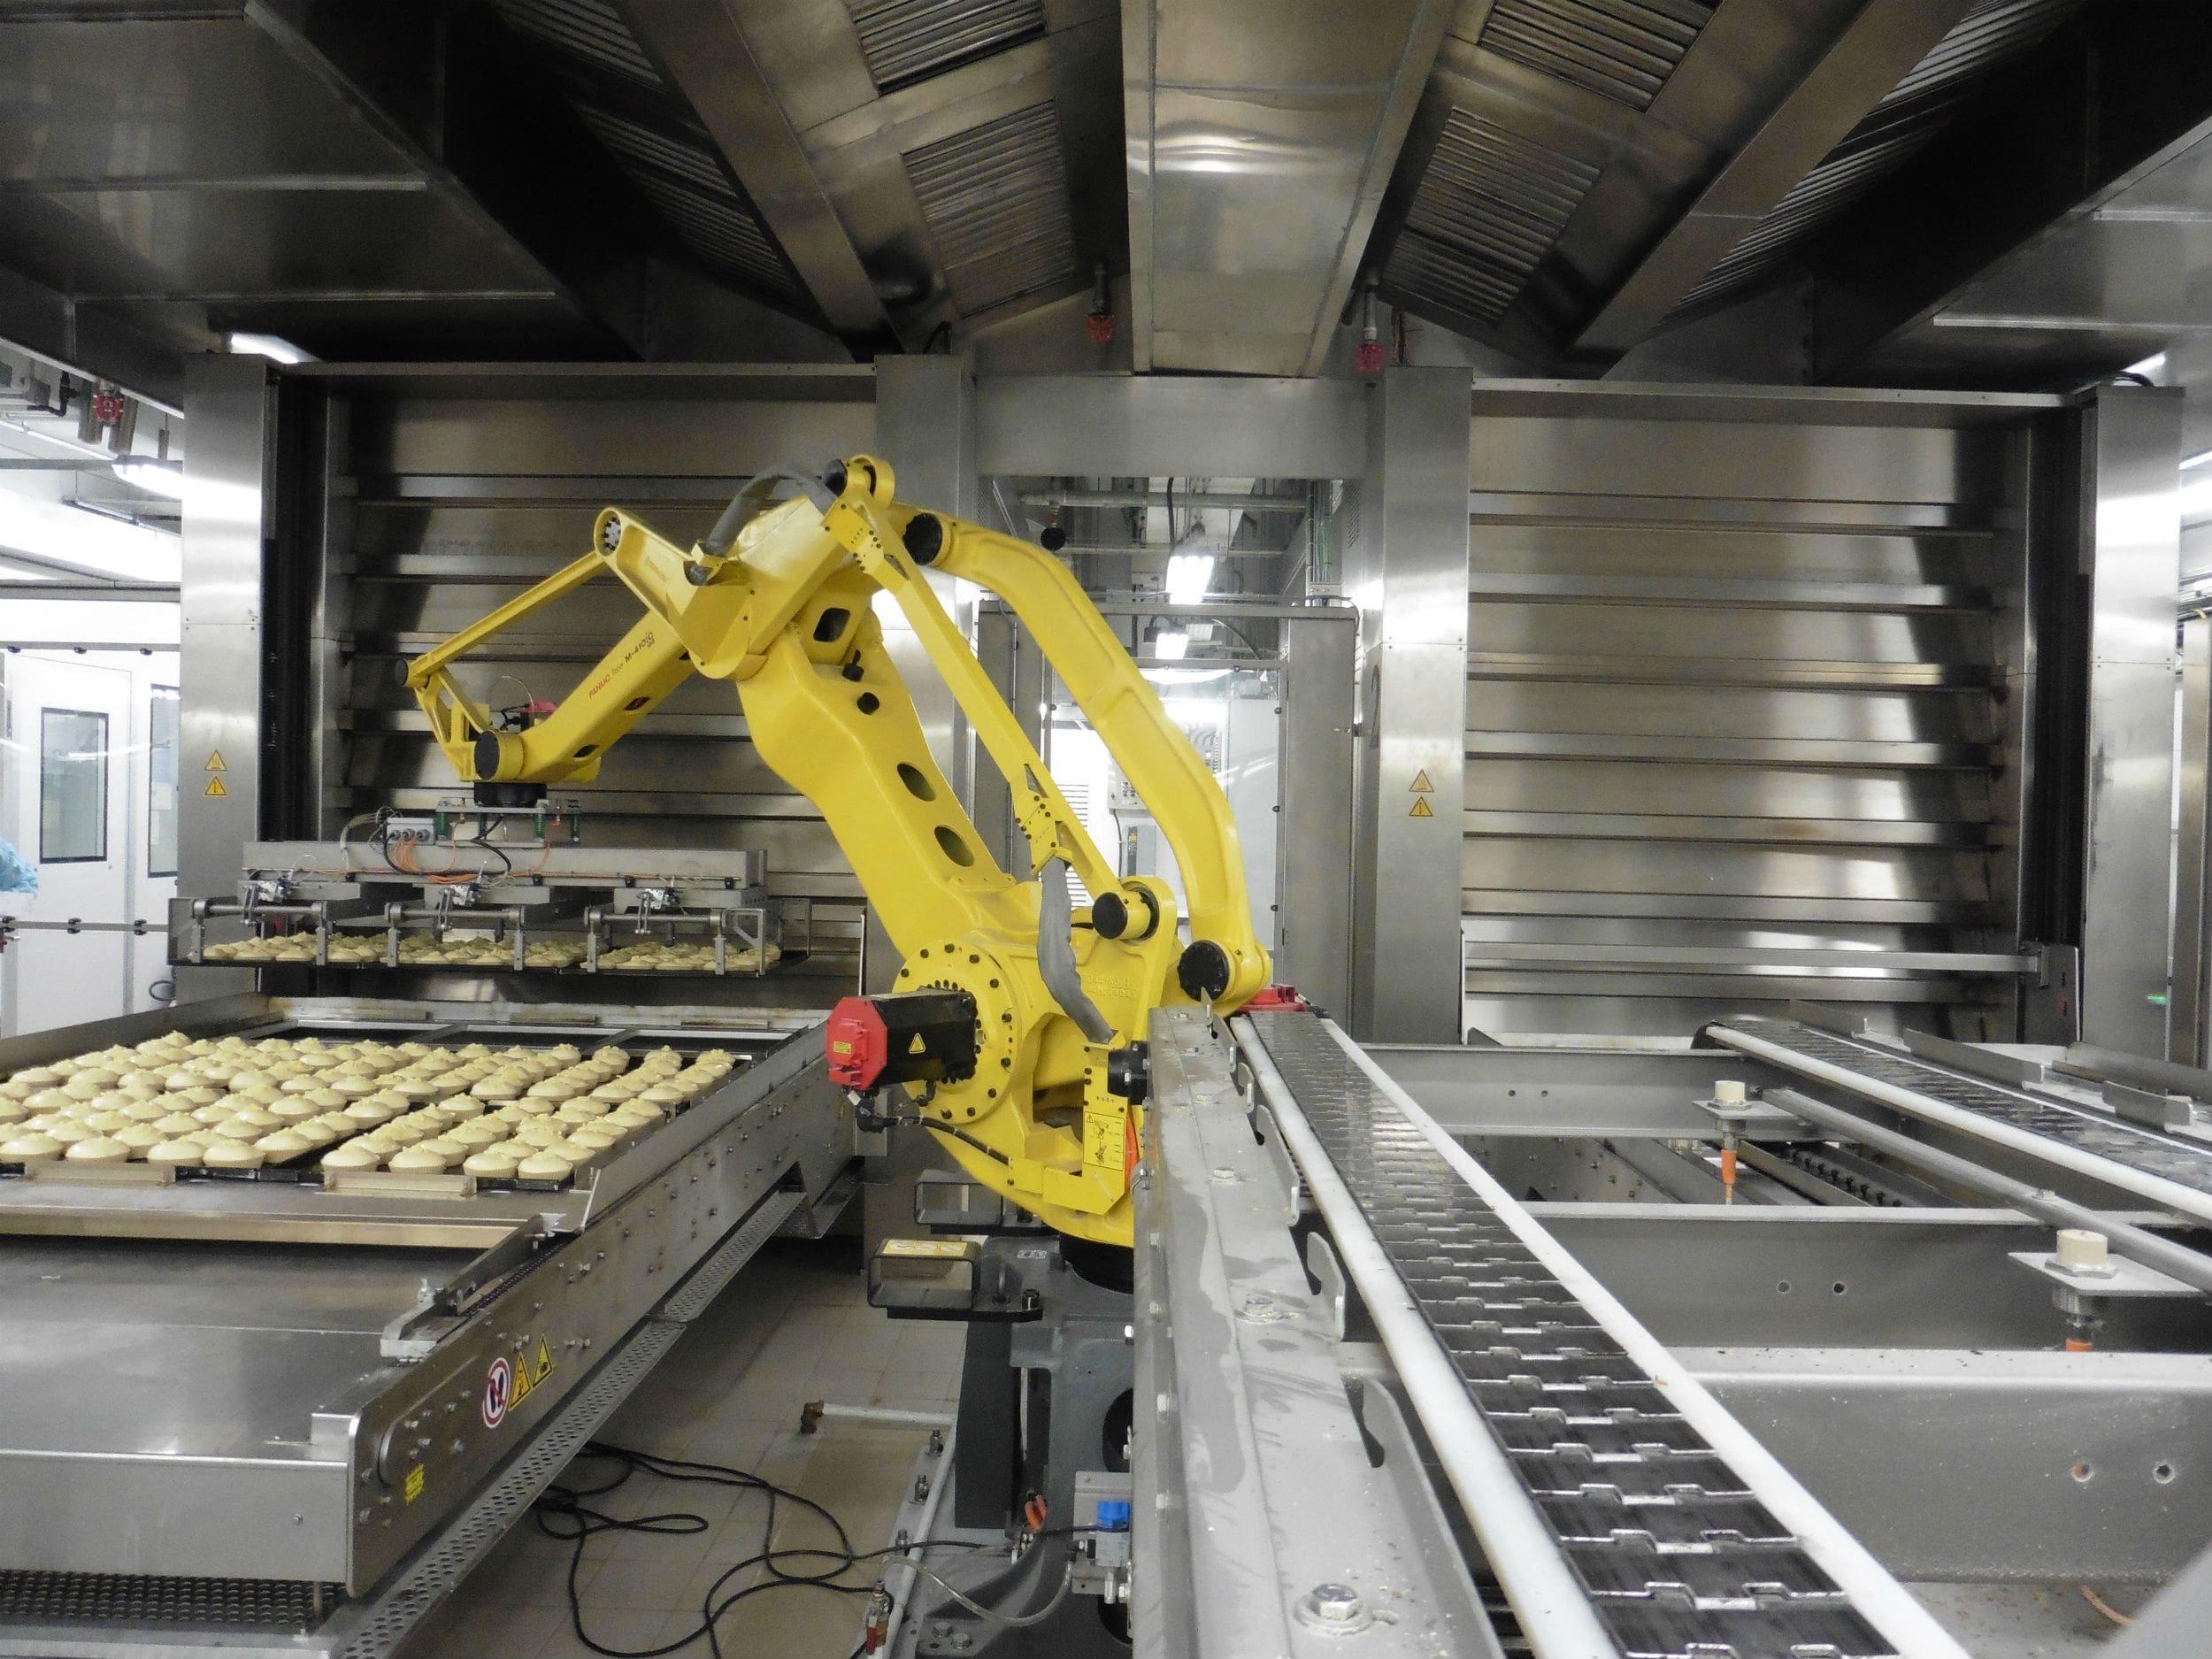 The Impact of Automated Industrial Bakery Equipment